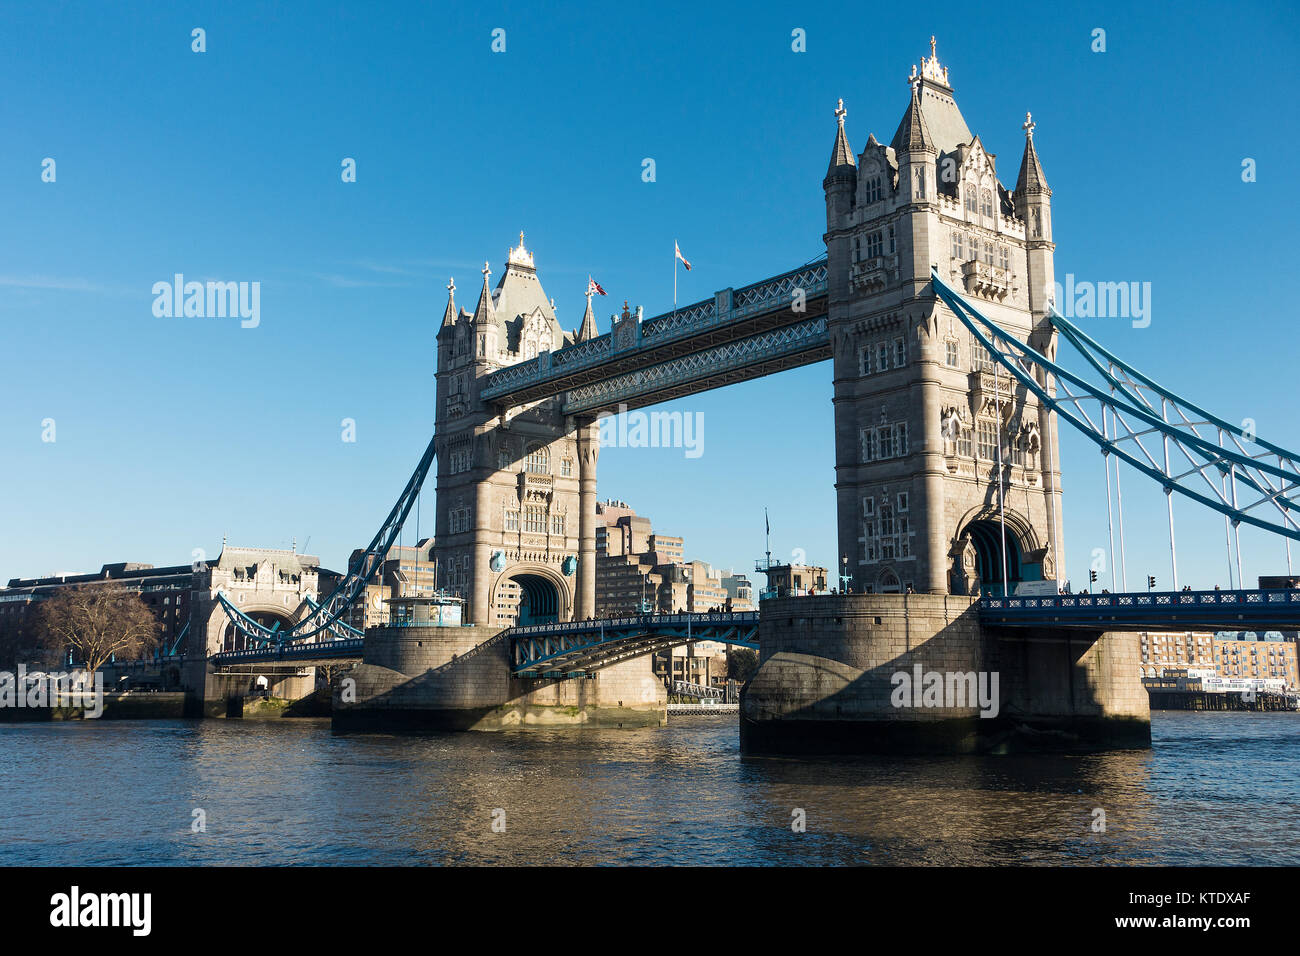 The Beautiful Tower Bridge and River Thames From St Katharine Pier on the North Bank London England United Kingdom UK Stock Photo